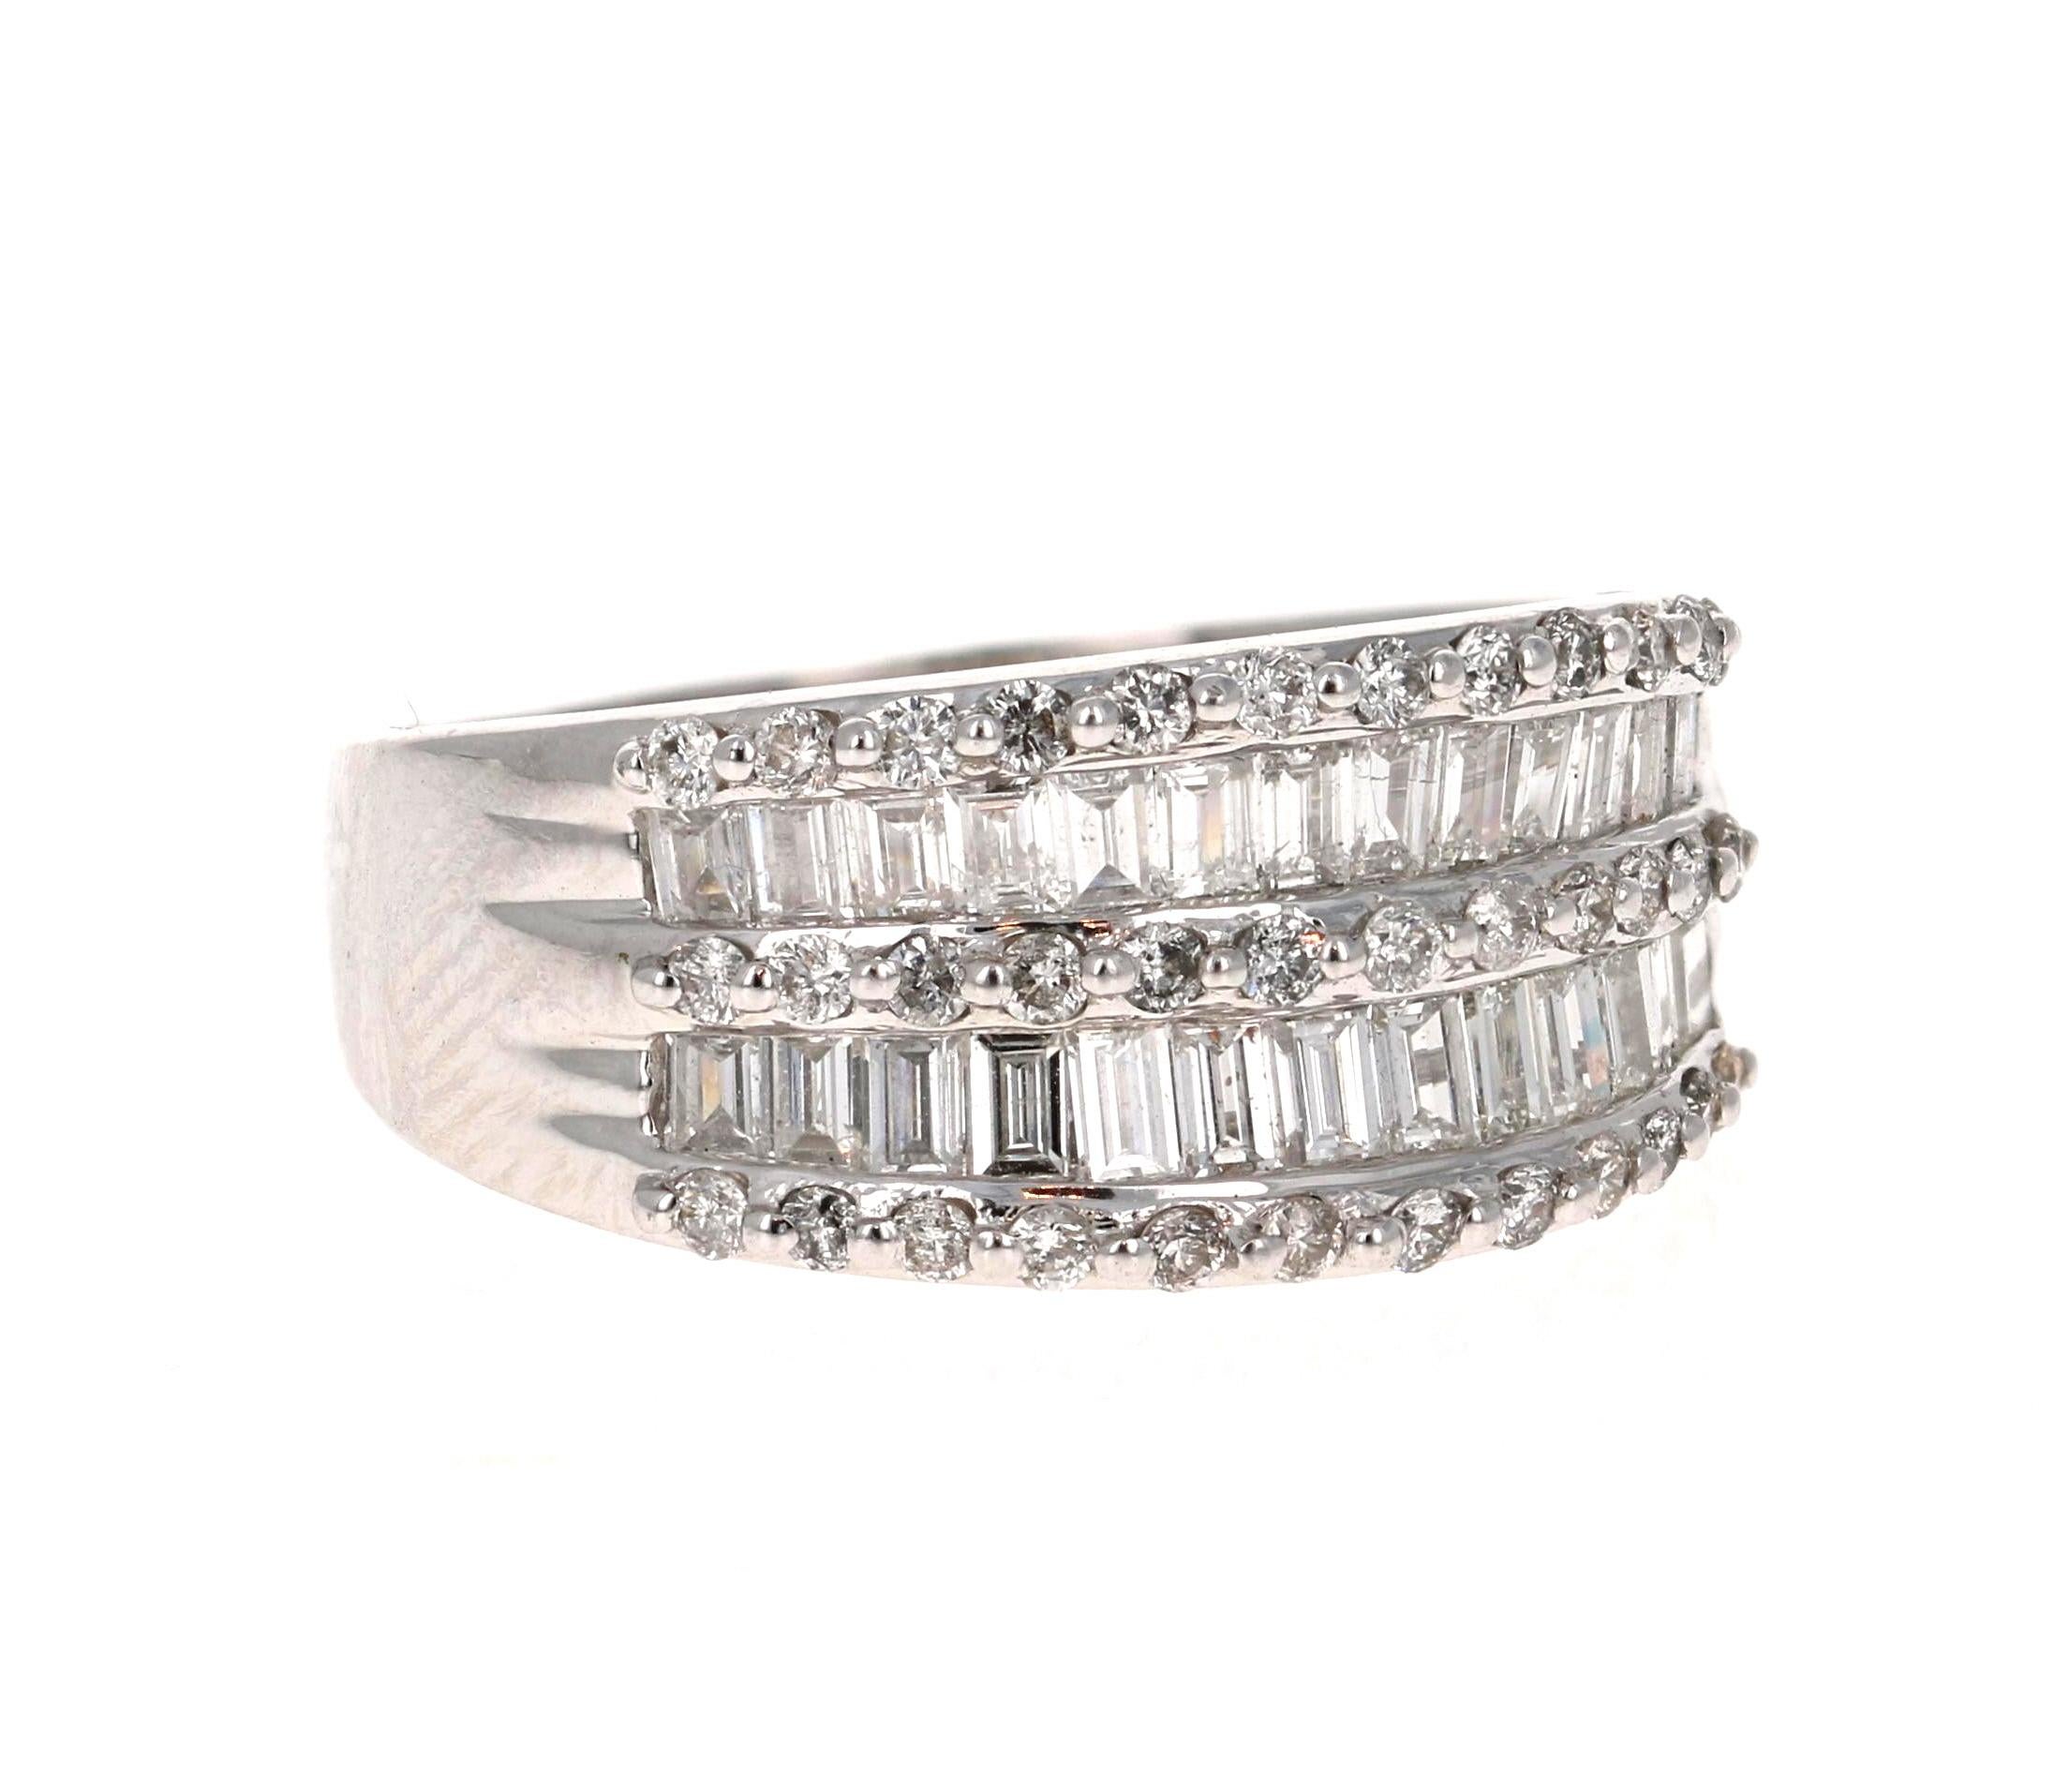 Classy Baguette and Round Cut Diamond Band 

This ring has 26 Baguette Cut Diamonds that weigh 1.30 Carats and is embellished with 36 Round Cut Diamonds that weigh 0.30 Carats. The clarity and color of the diamonds are SI2-F.

Crafted in 14 Karat